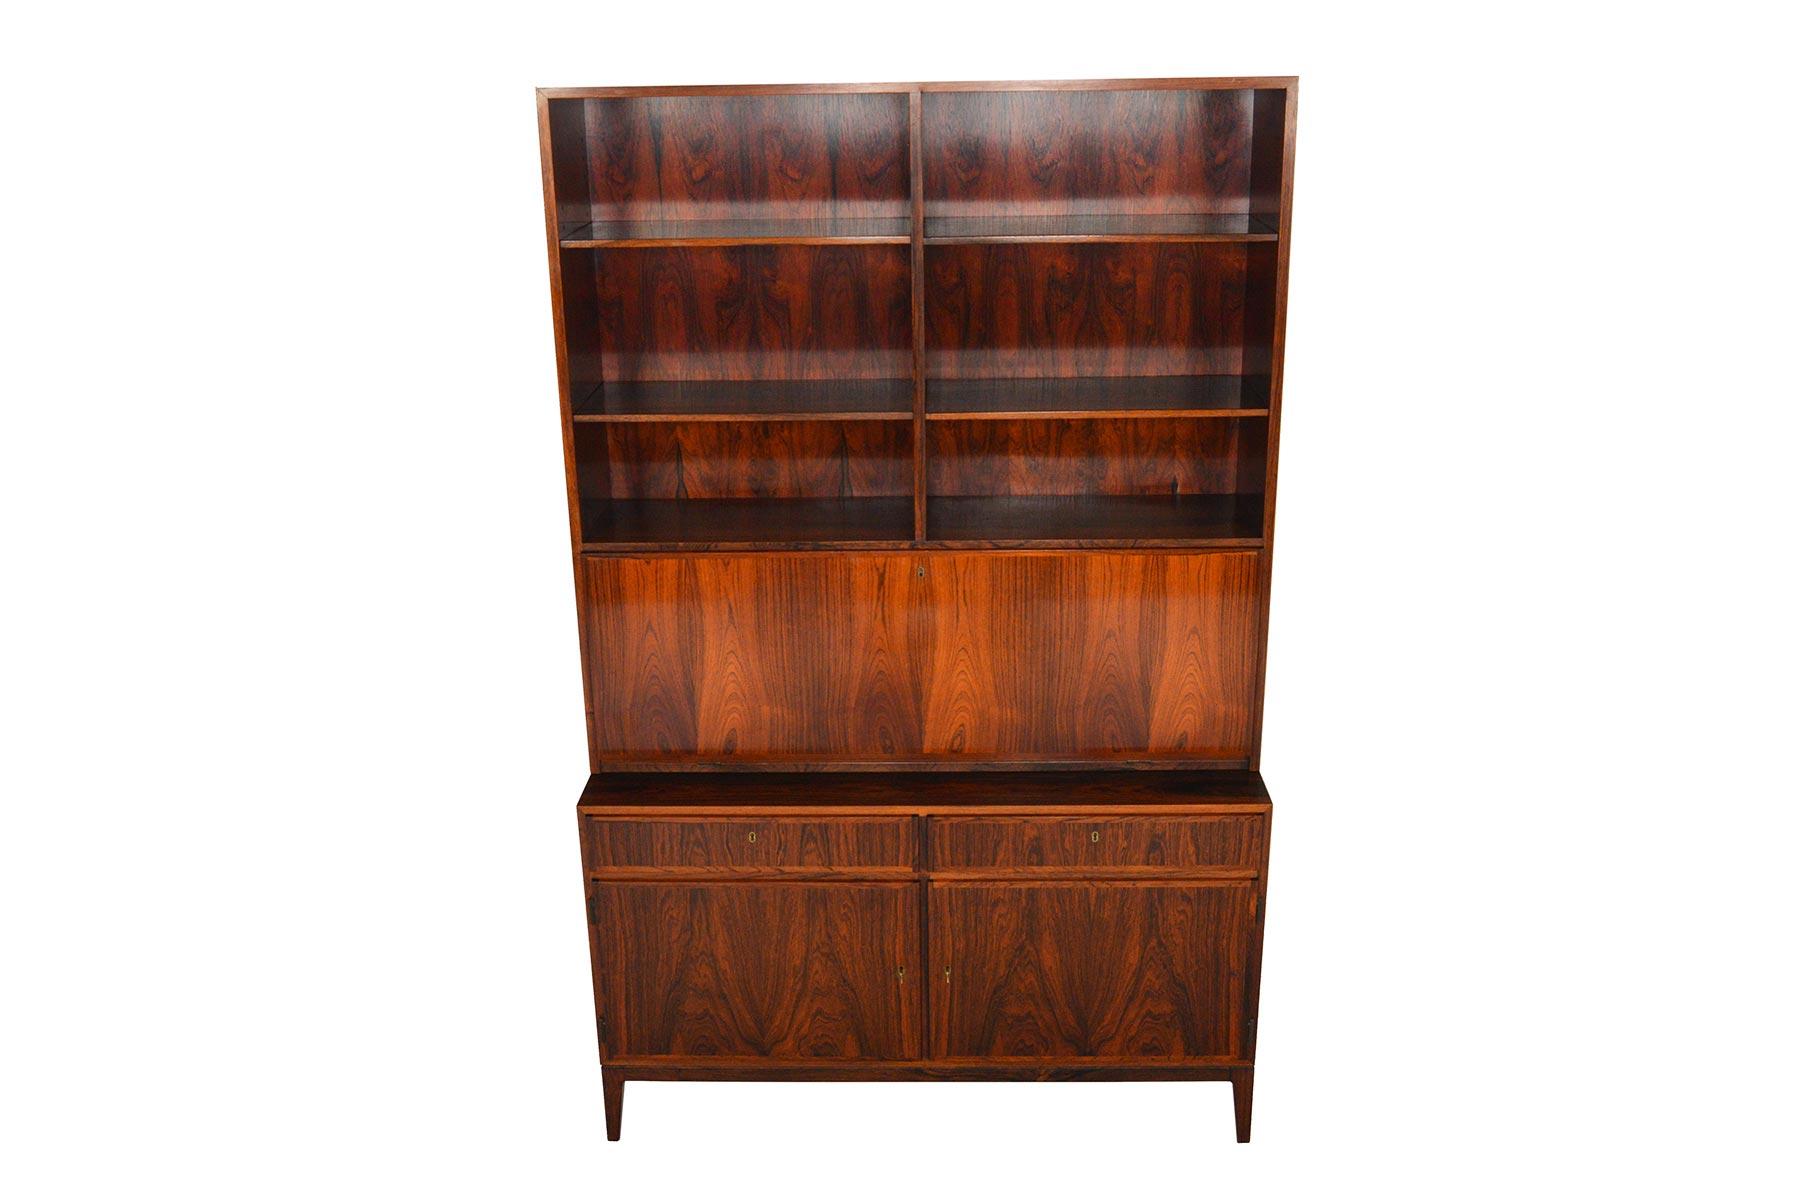 This versatile credenza with bookcase hutch was designed by Kai Winding in the 1960s. Flush cabinet drawers and doors showcase beautiful rosewood grain patterning. Lower cabinet offers two bays with adjustable shelving. The removable hutch top